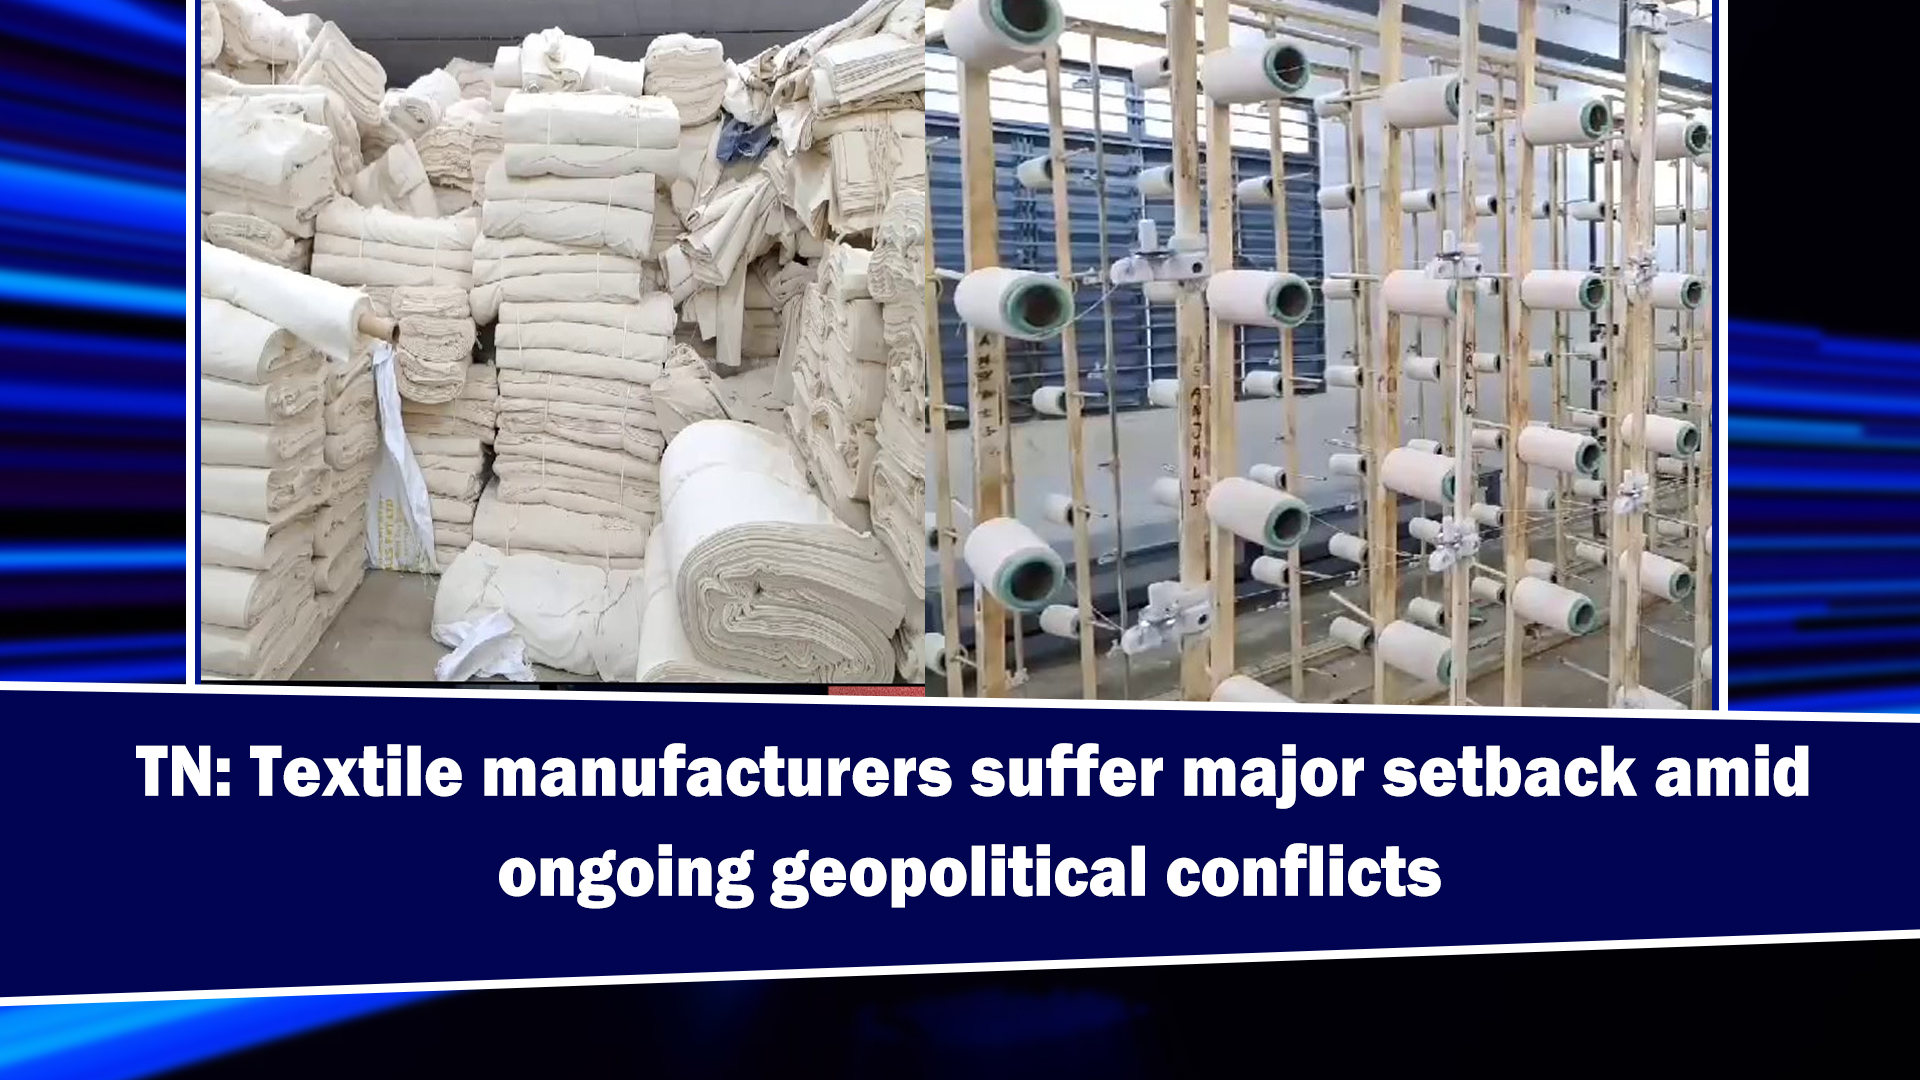 Textile manufacturers suffer major setback amid ongoing geopolitical conflicts